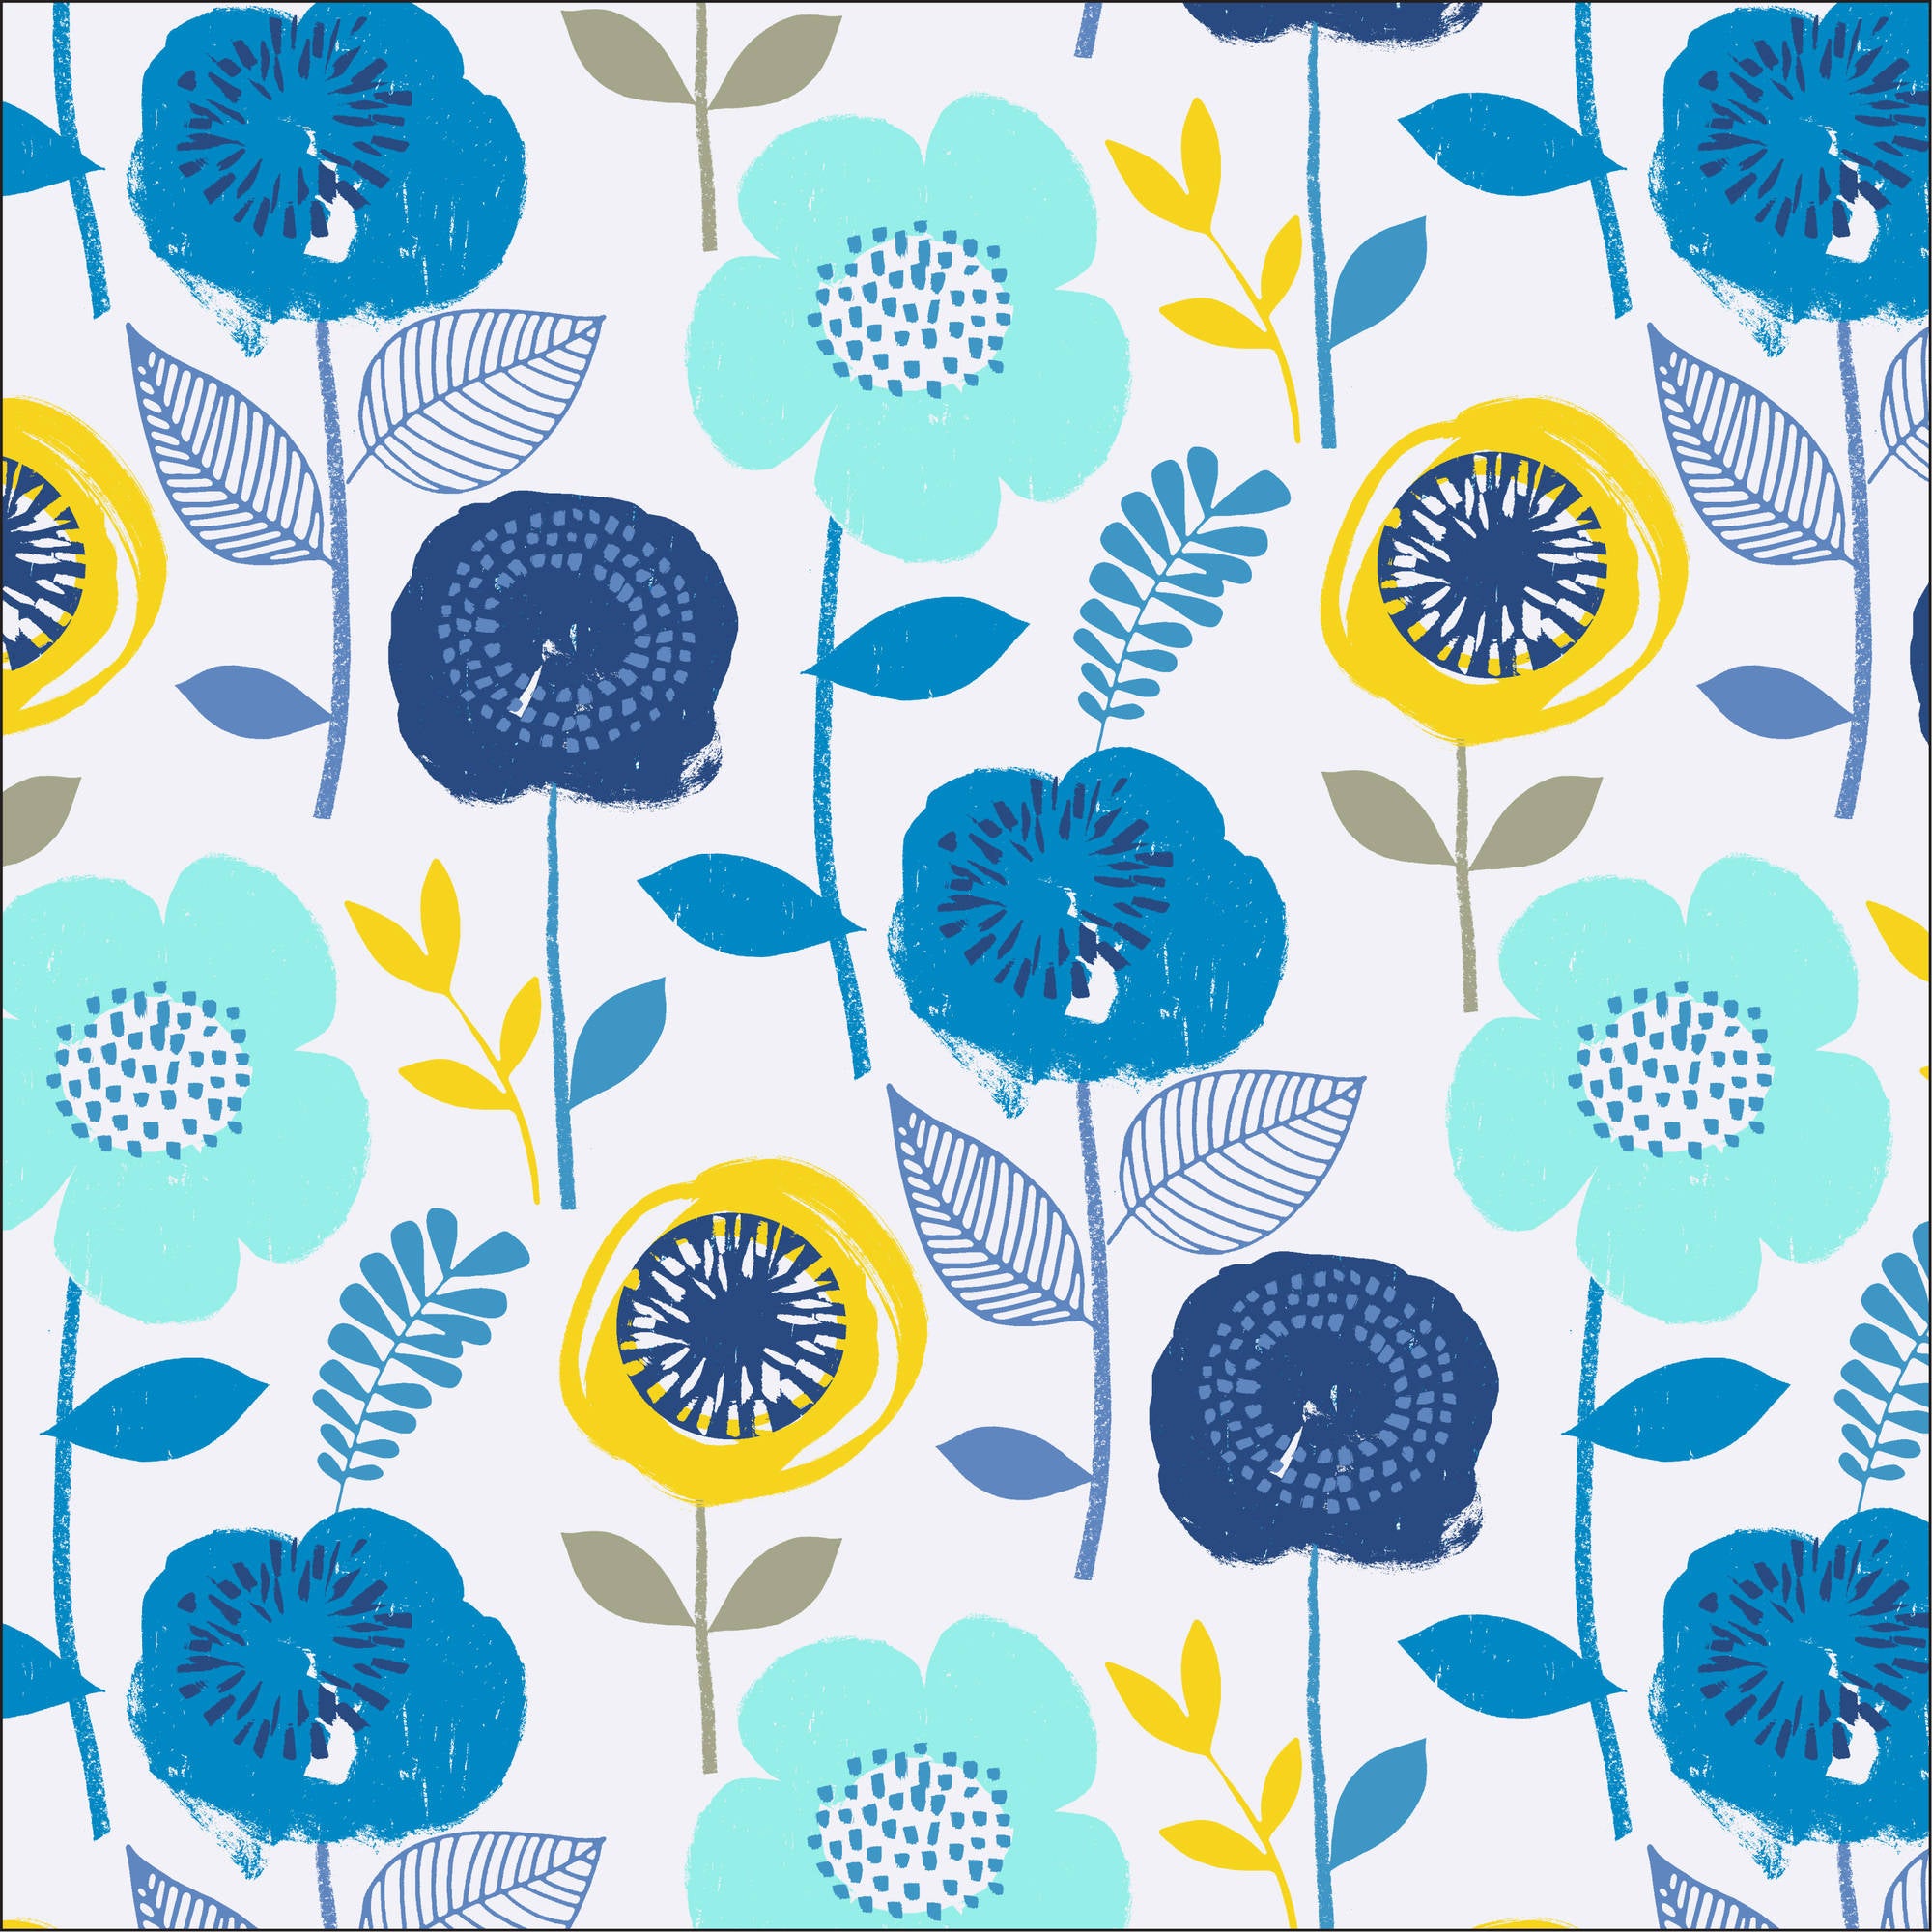 Waverly Inspirations Cotton 44" Bloom Lagoon Color Sewing Fabric by the Yard